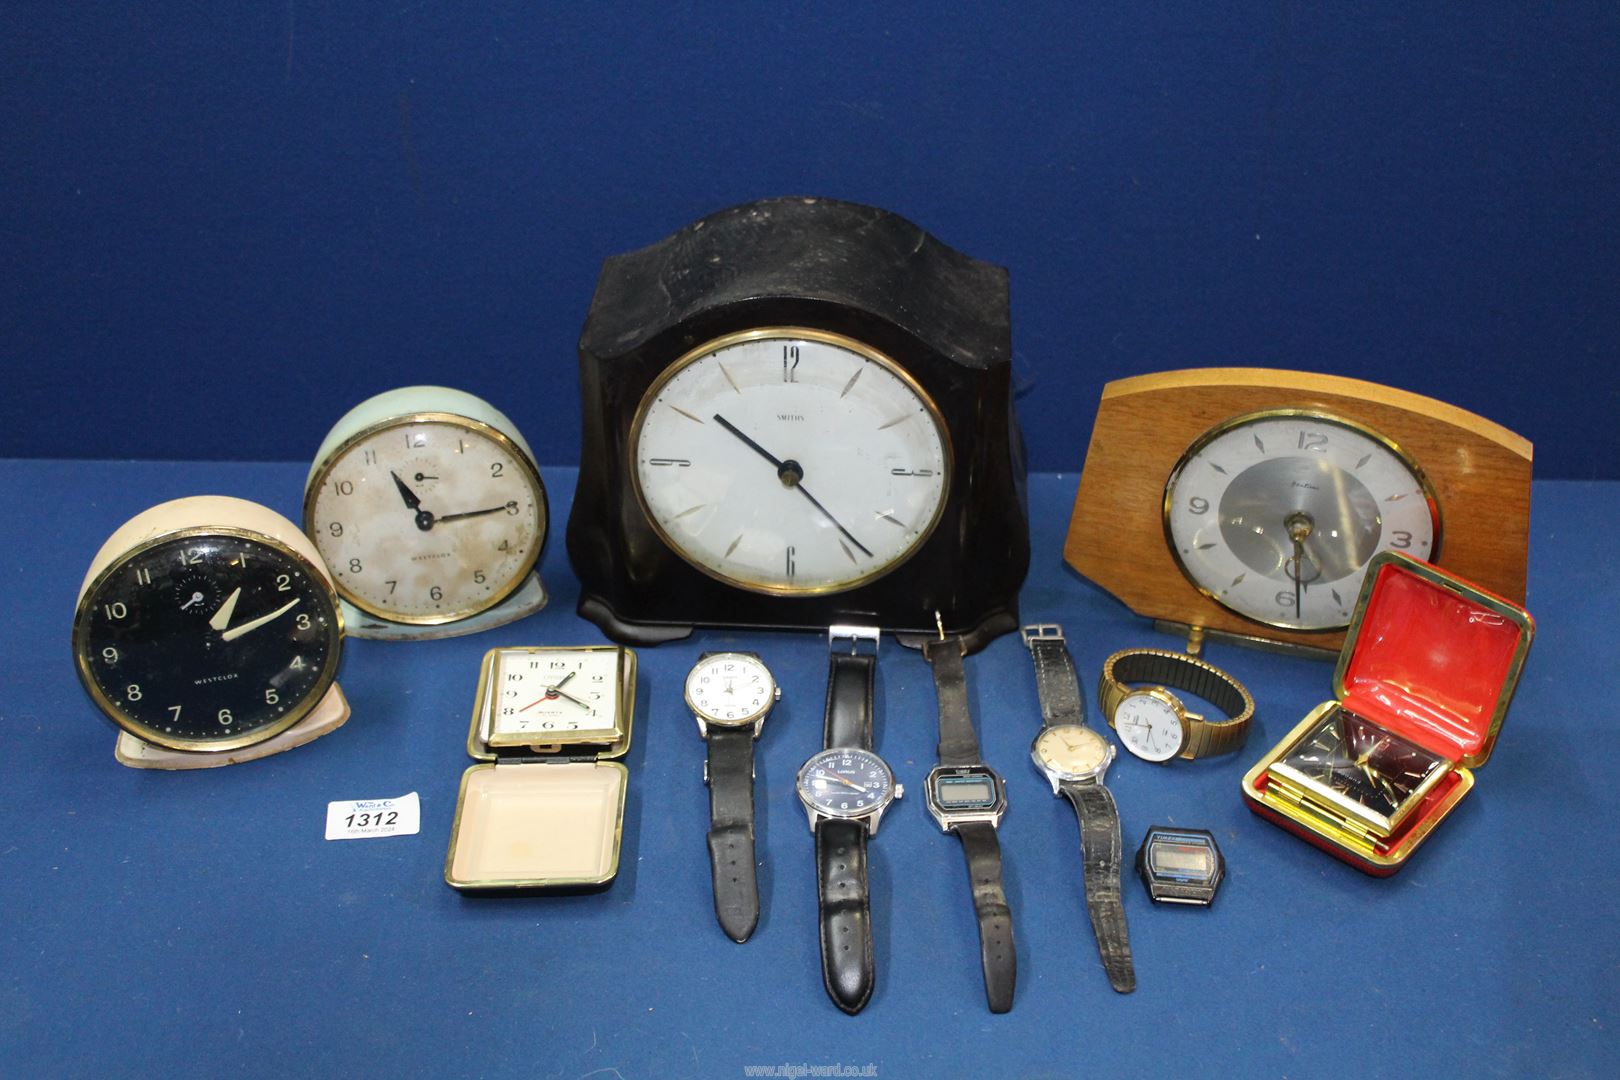 A Smiths Bakelite Mantle clock and two Westclox clocks, plus watches, etc.